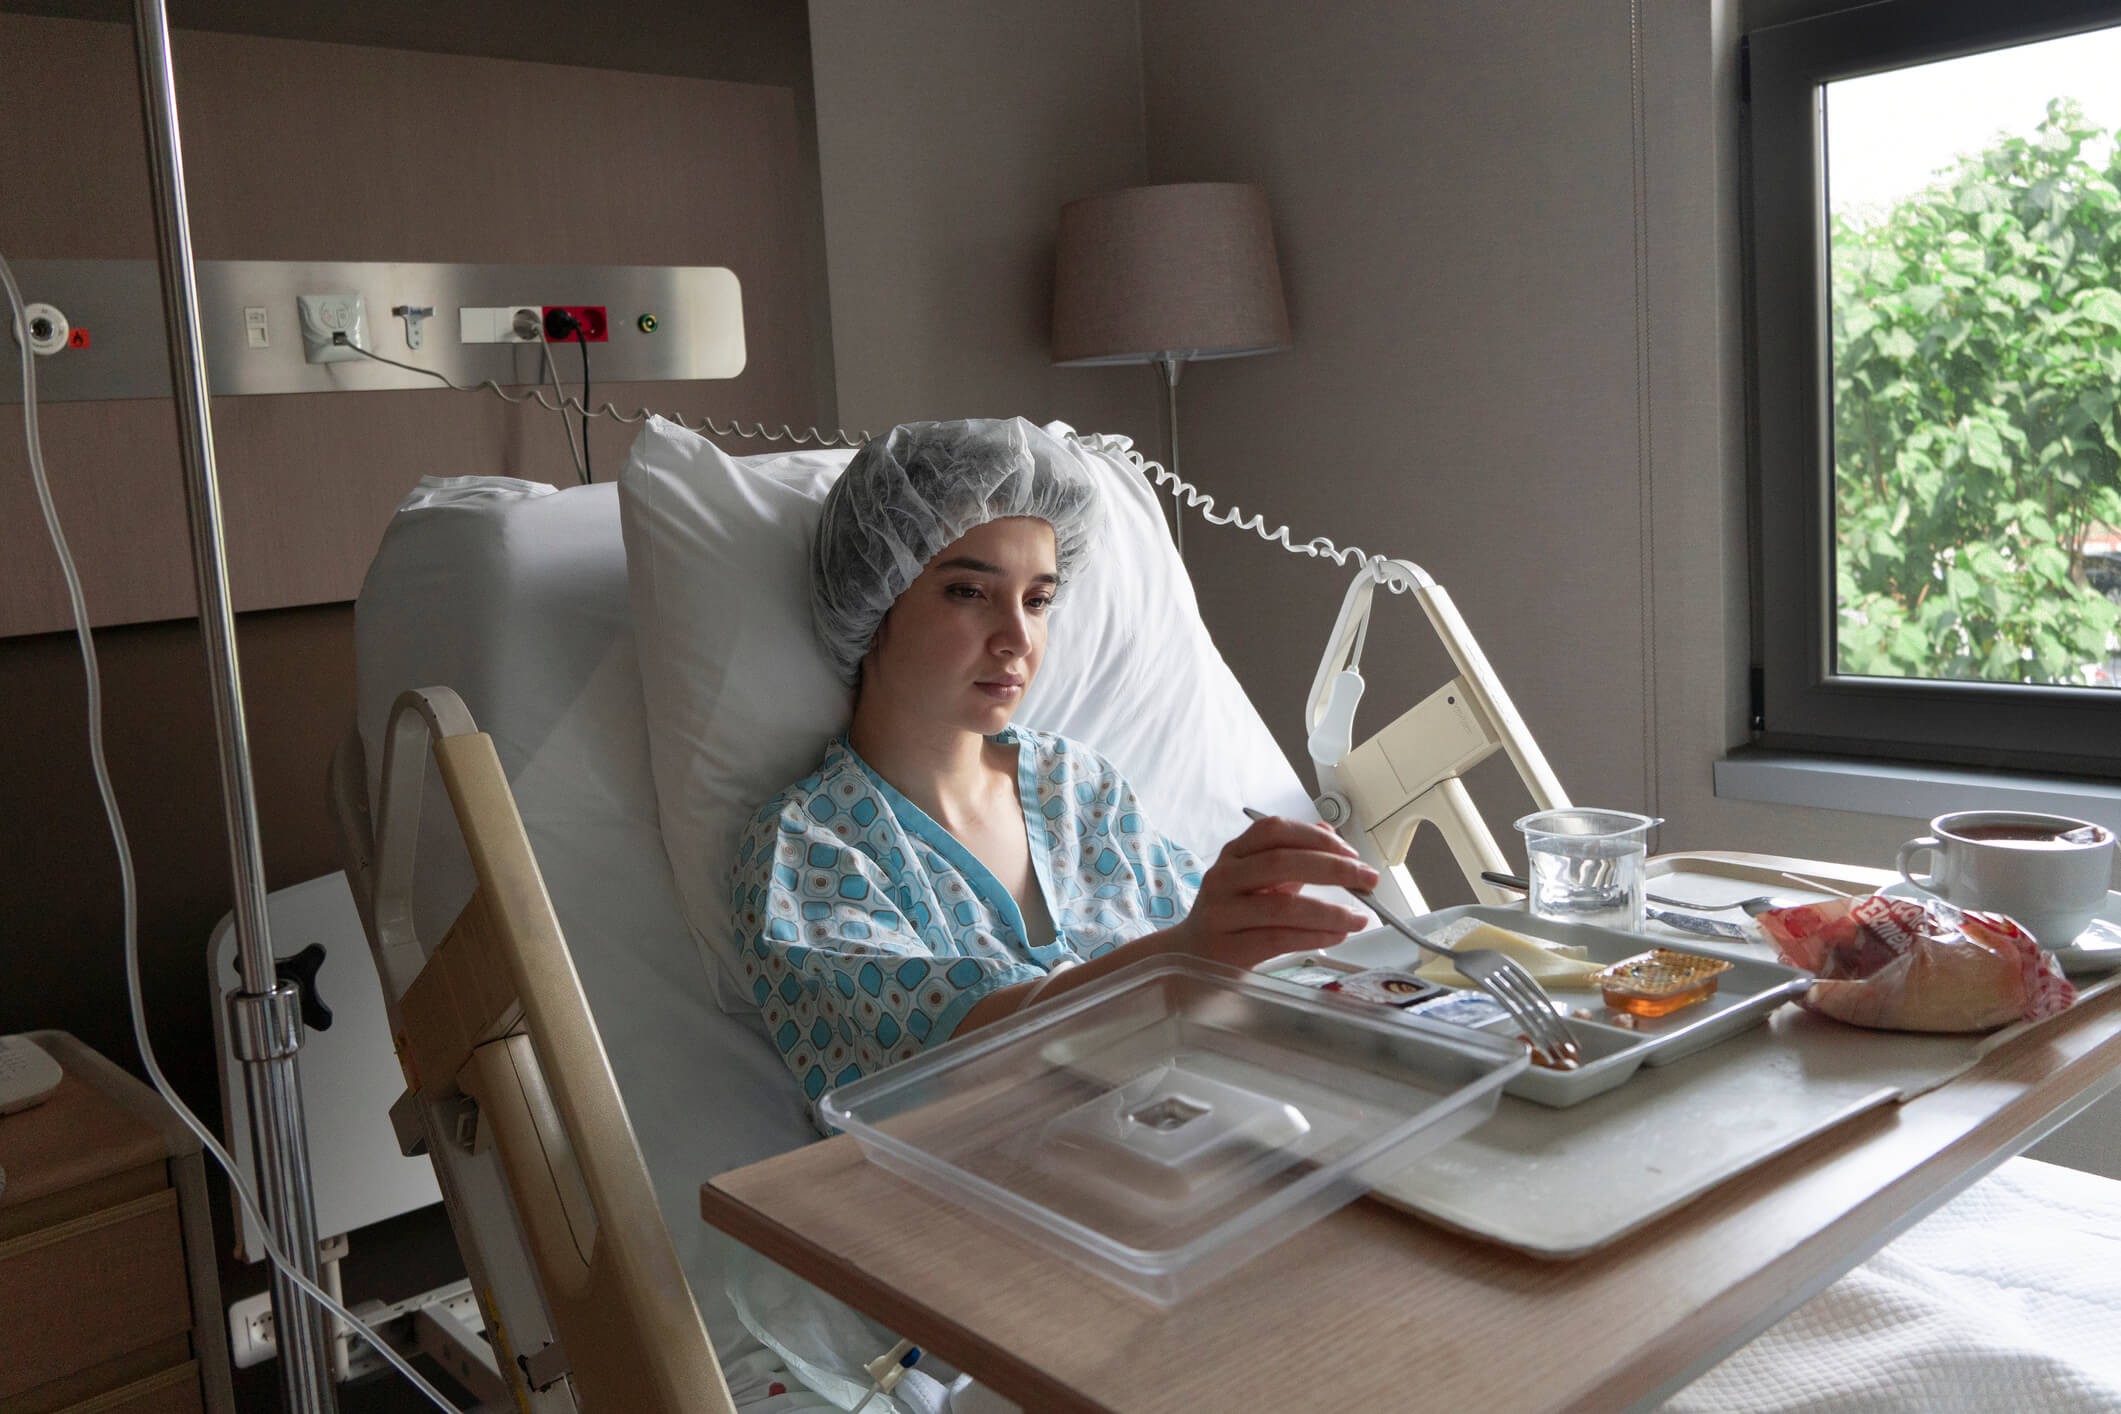 Young patient on hospital bed eating food.